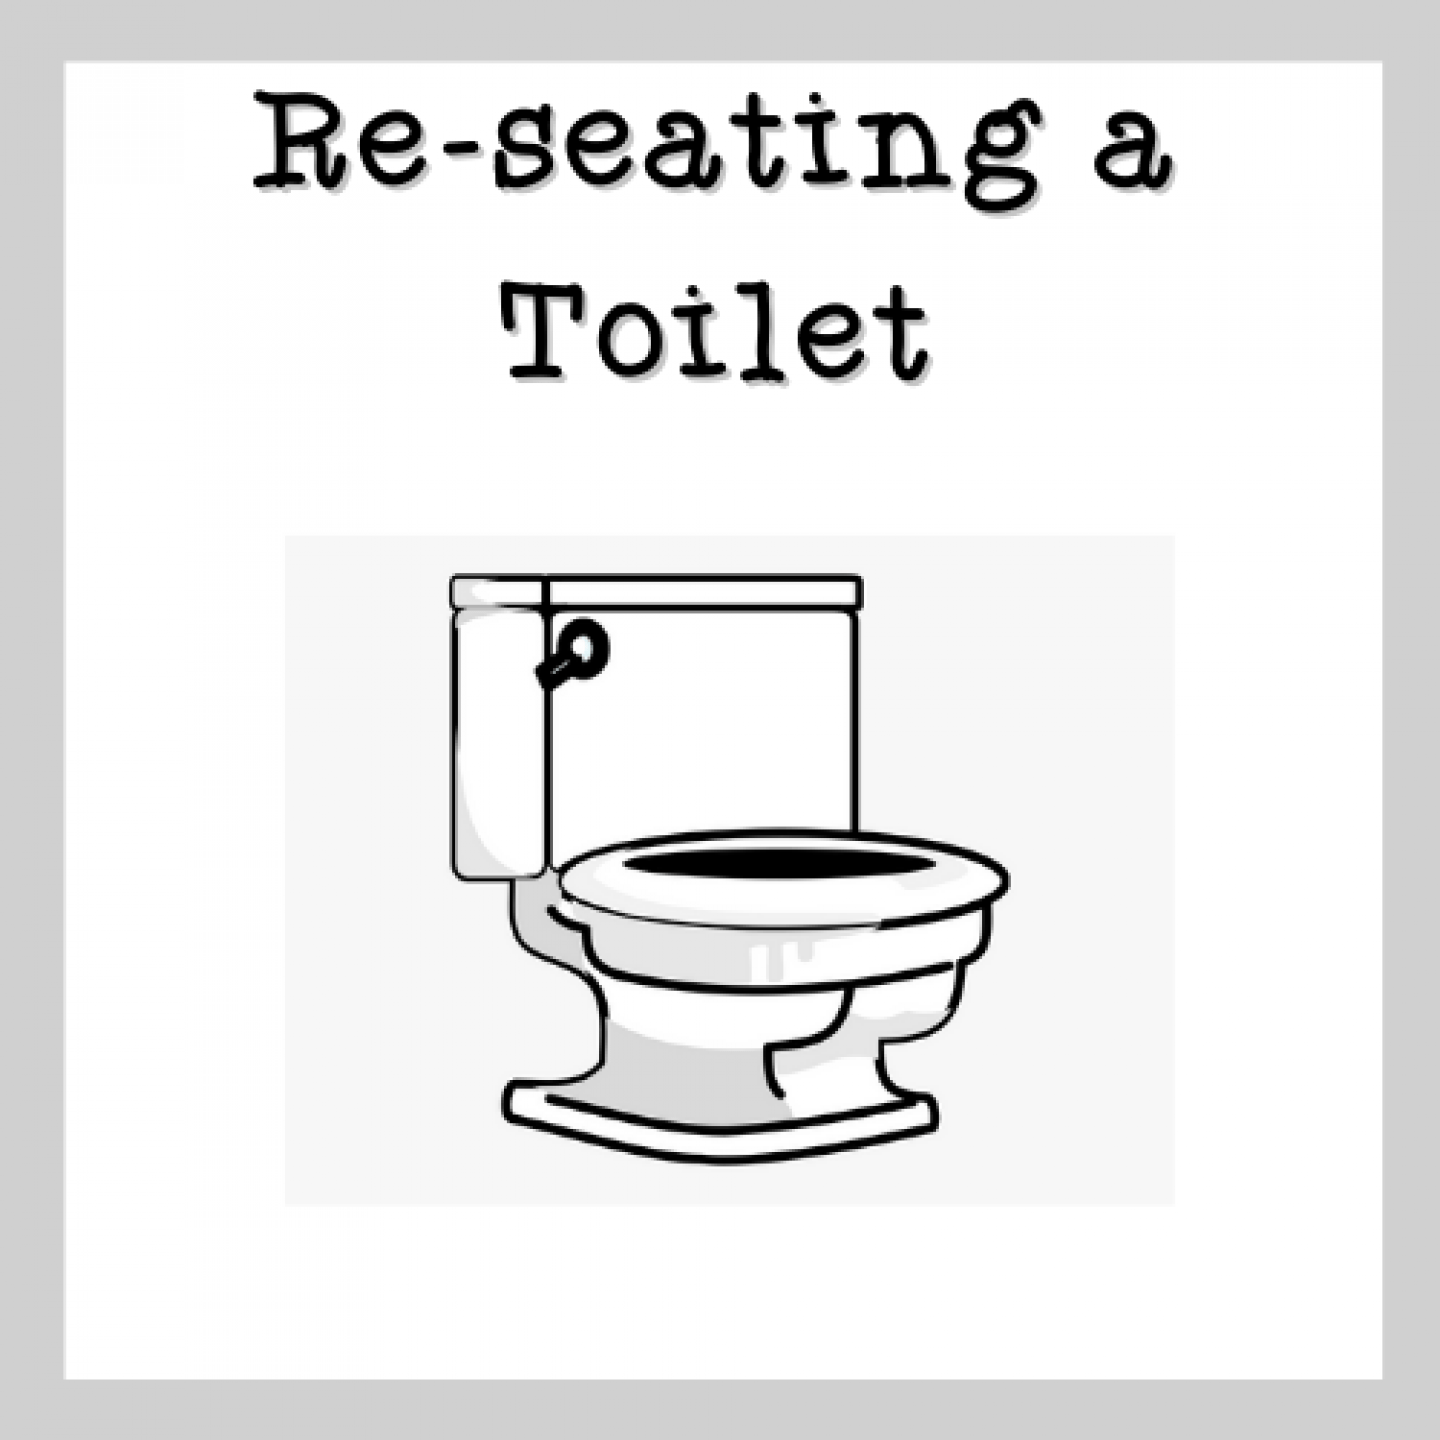 Re-seating_a_Toilet-feat_img